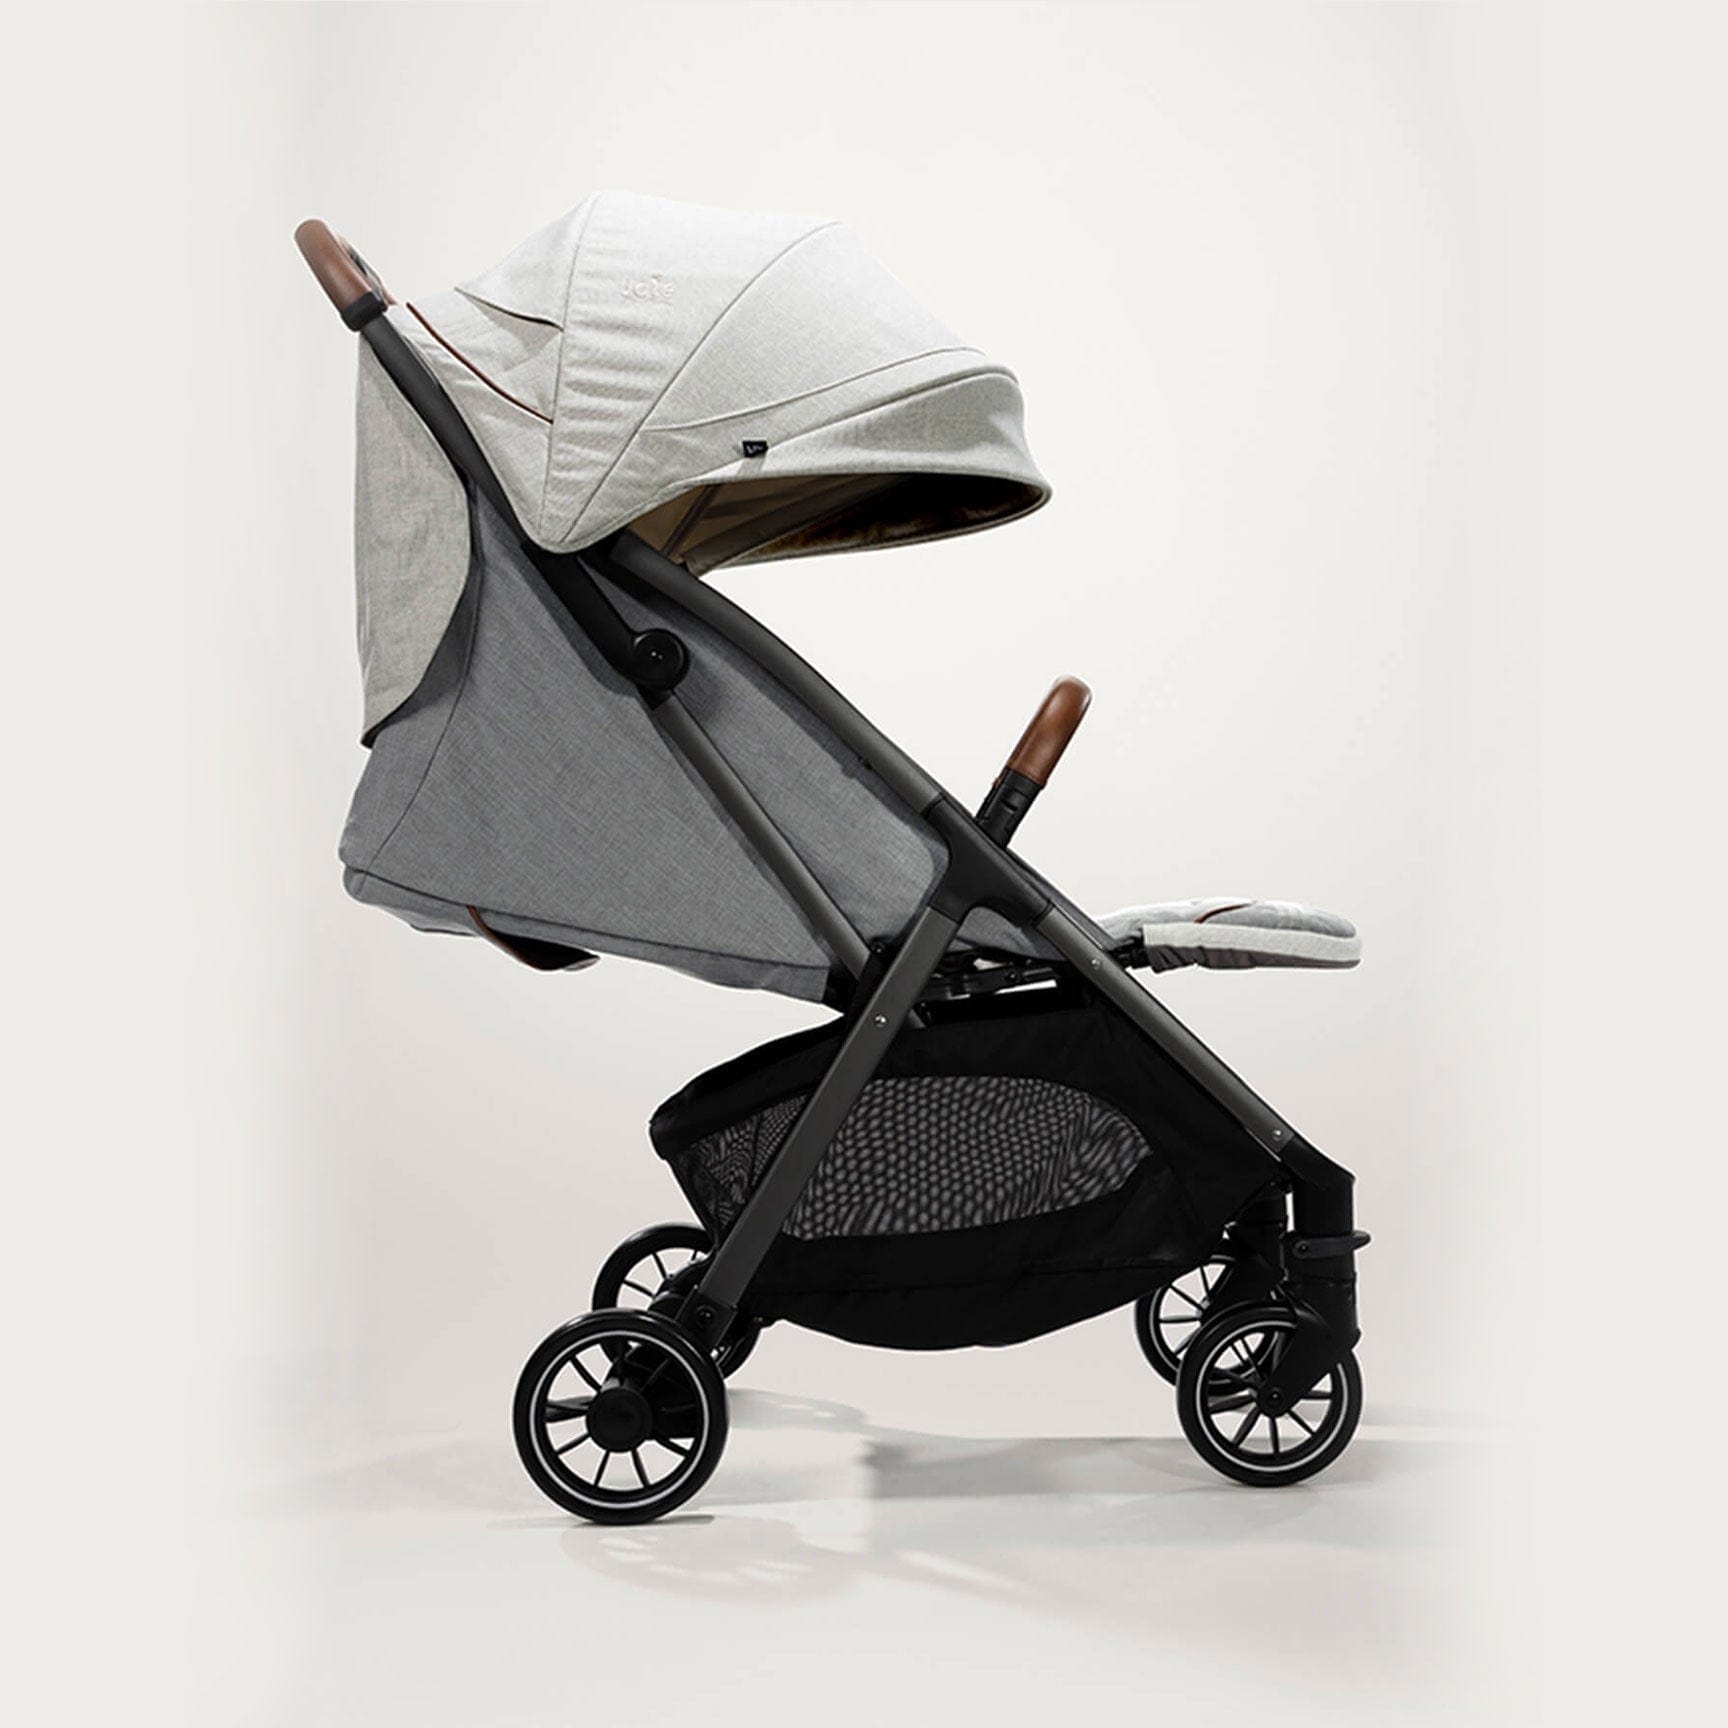 Joie Parcel Signature Stroller in Oyster Pushchairs & Buggies S2112AAOYS000